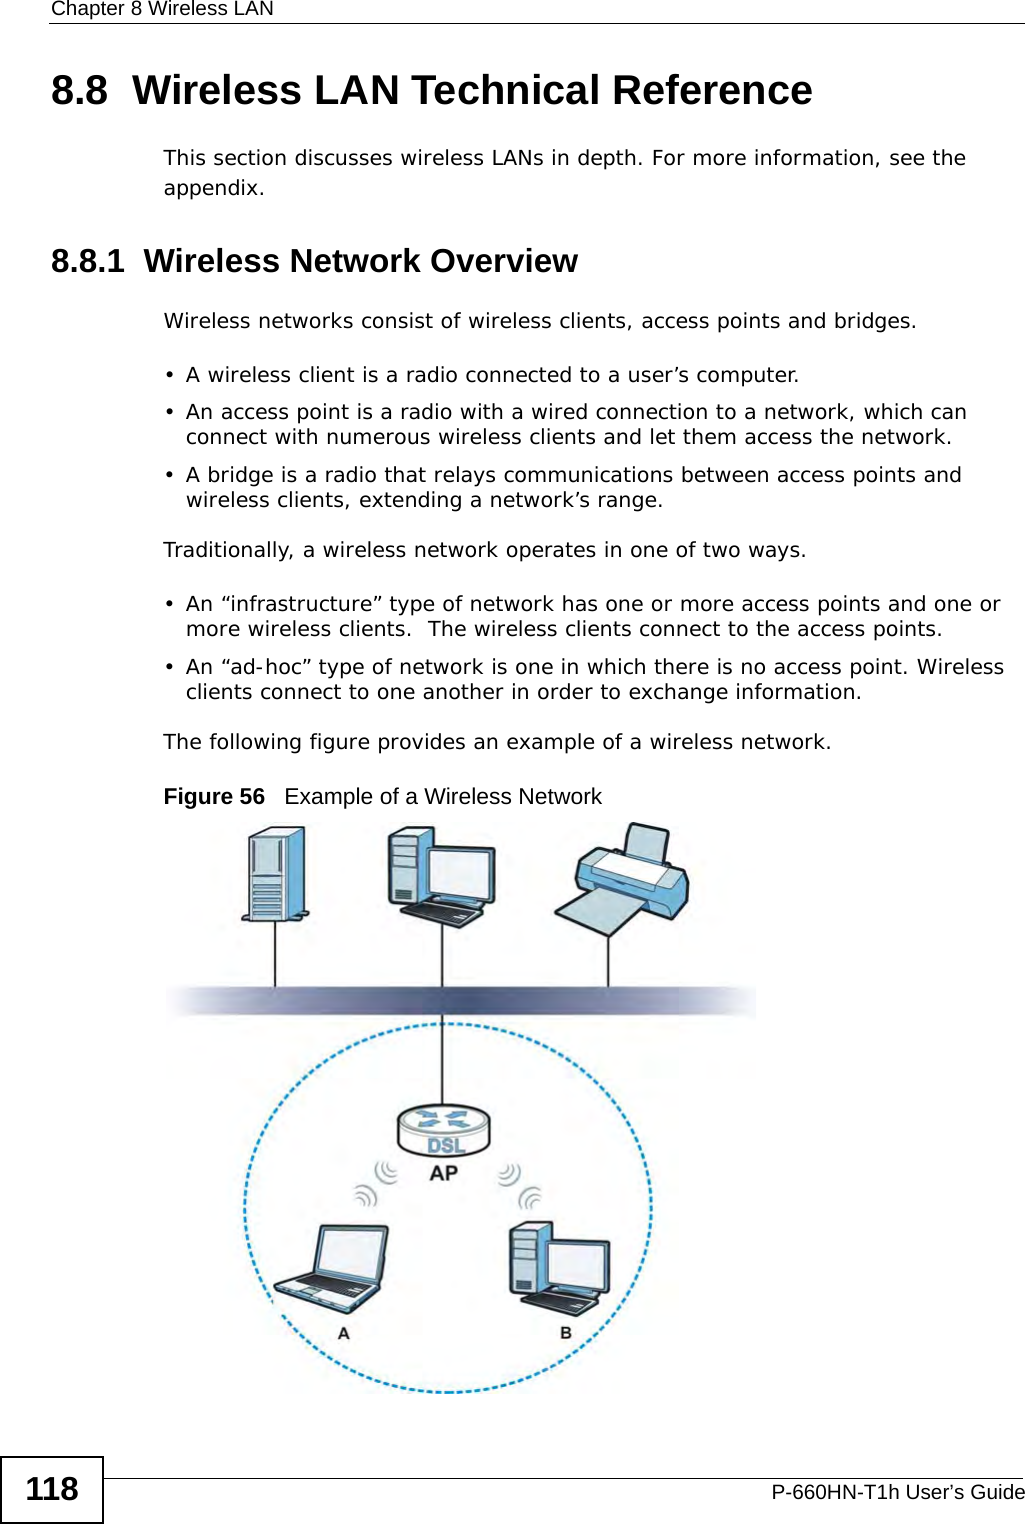 Chapter 8 Wireless LANP-660HN-T1h User’s Guide1188.8  Wireless LAN Technical ReferenceThis section discusses wireless LANs in depth. For more information, see the appendix.8.8.1  Wireless Network OverviewWireless networks consist of wireless clients, access points and bridges. • A wireless client is a radio connected to a user’s computer. • An access point is a radio with a wired connection to a network, which can connect with numerous wireless clients and let them access the network. • A bridge is a radio that relays communications between access points and wireless clients, extending a network’s range. Traditionally, a wireless network operates in one of two ways.• An “infrastructure” type of network has one or more access points and one or more wireless clients.  The wireless clients connect to the access points.• An “ad-hoc” type of network is one in which there is no access point. Wireless clients connect to one another in order to exchange information.The following figure provides an example of a wireless network.Figure 56   Example of a Wireless Network